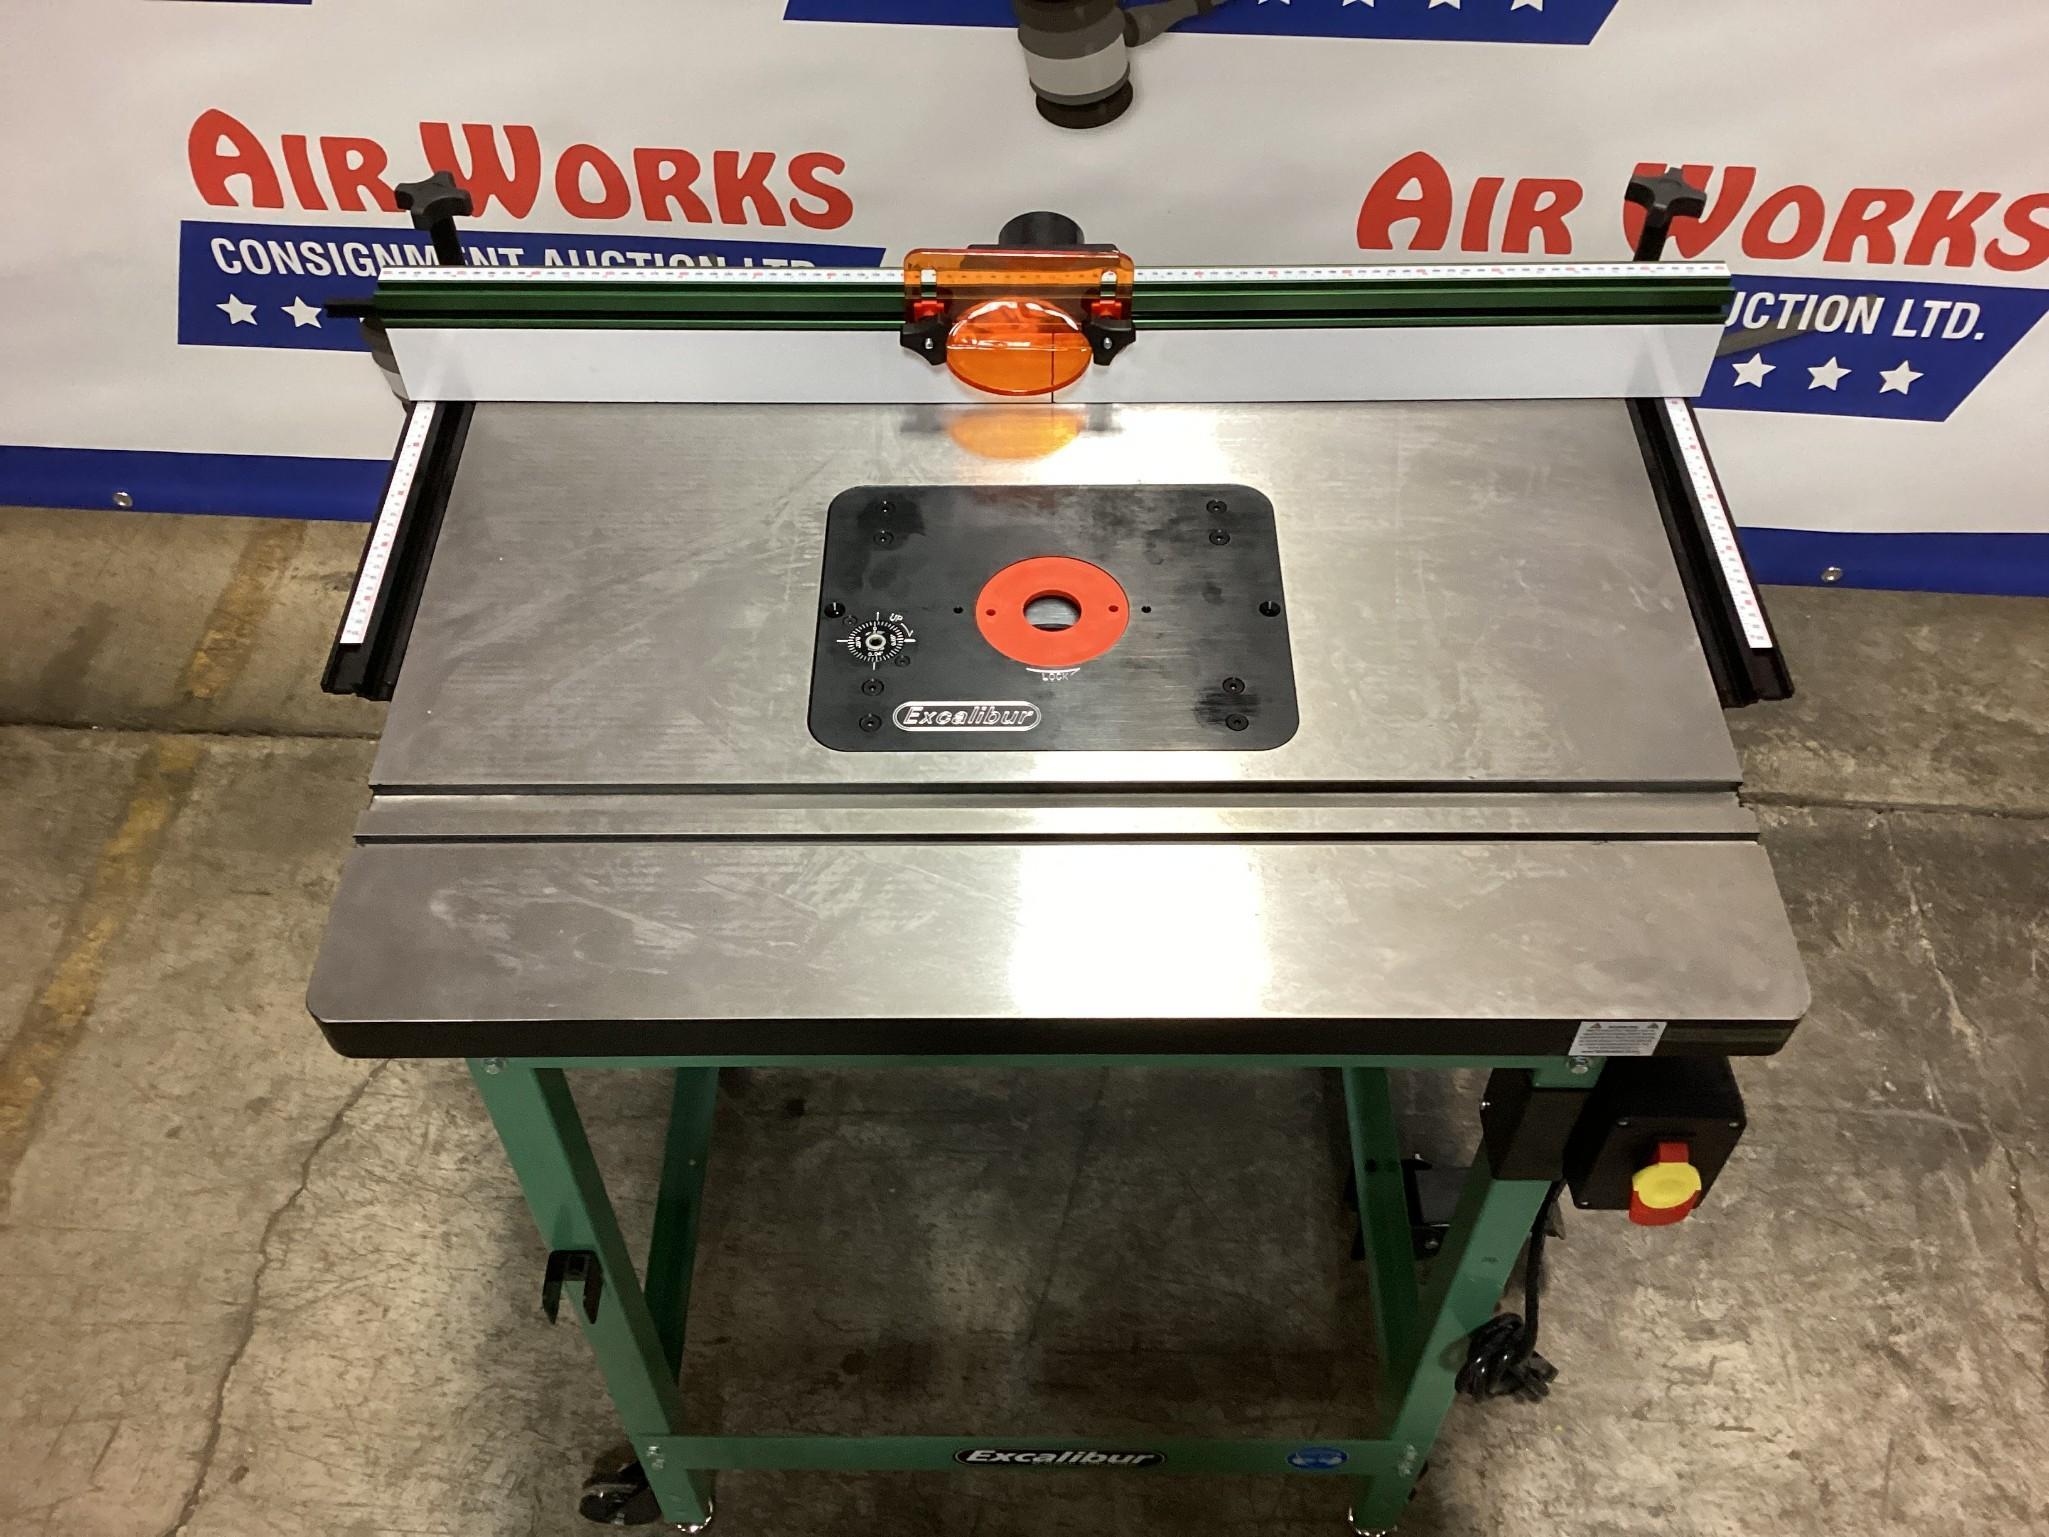 New Unused Excalibur Floor Model Router Table with Heavy-Duty Cast-Iron Top, Router Lift and Fence